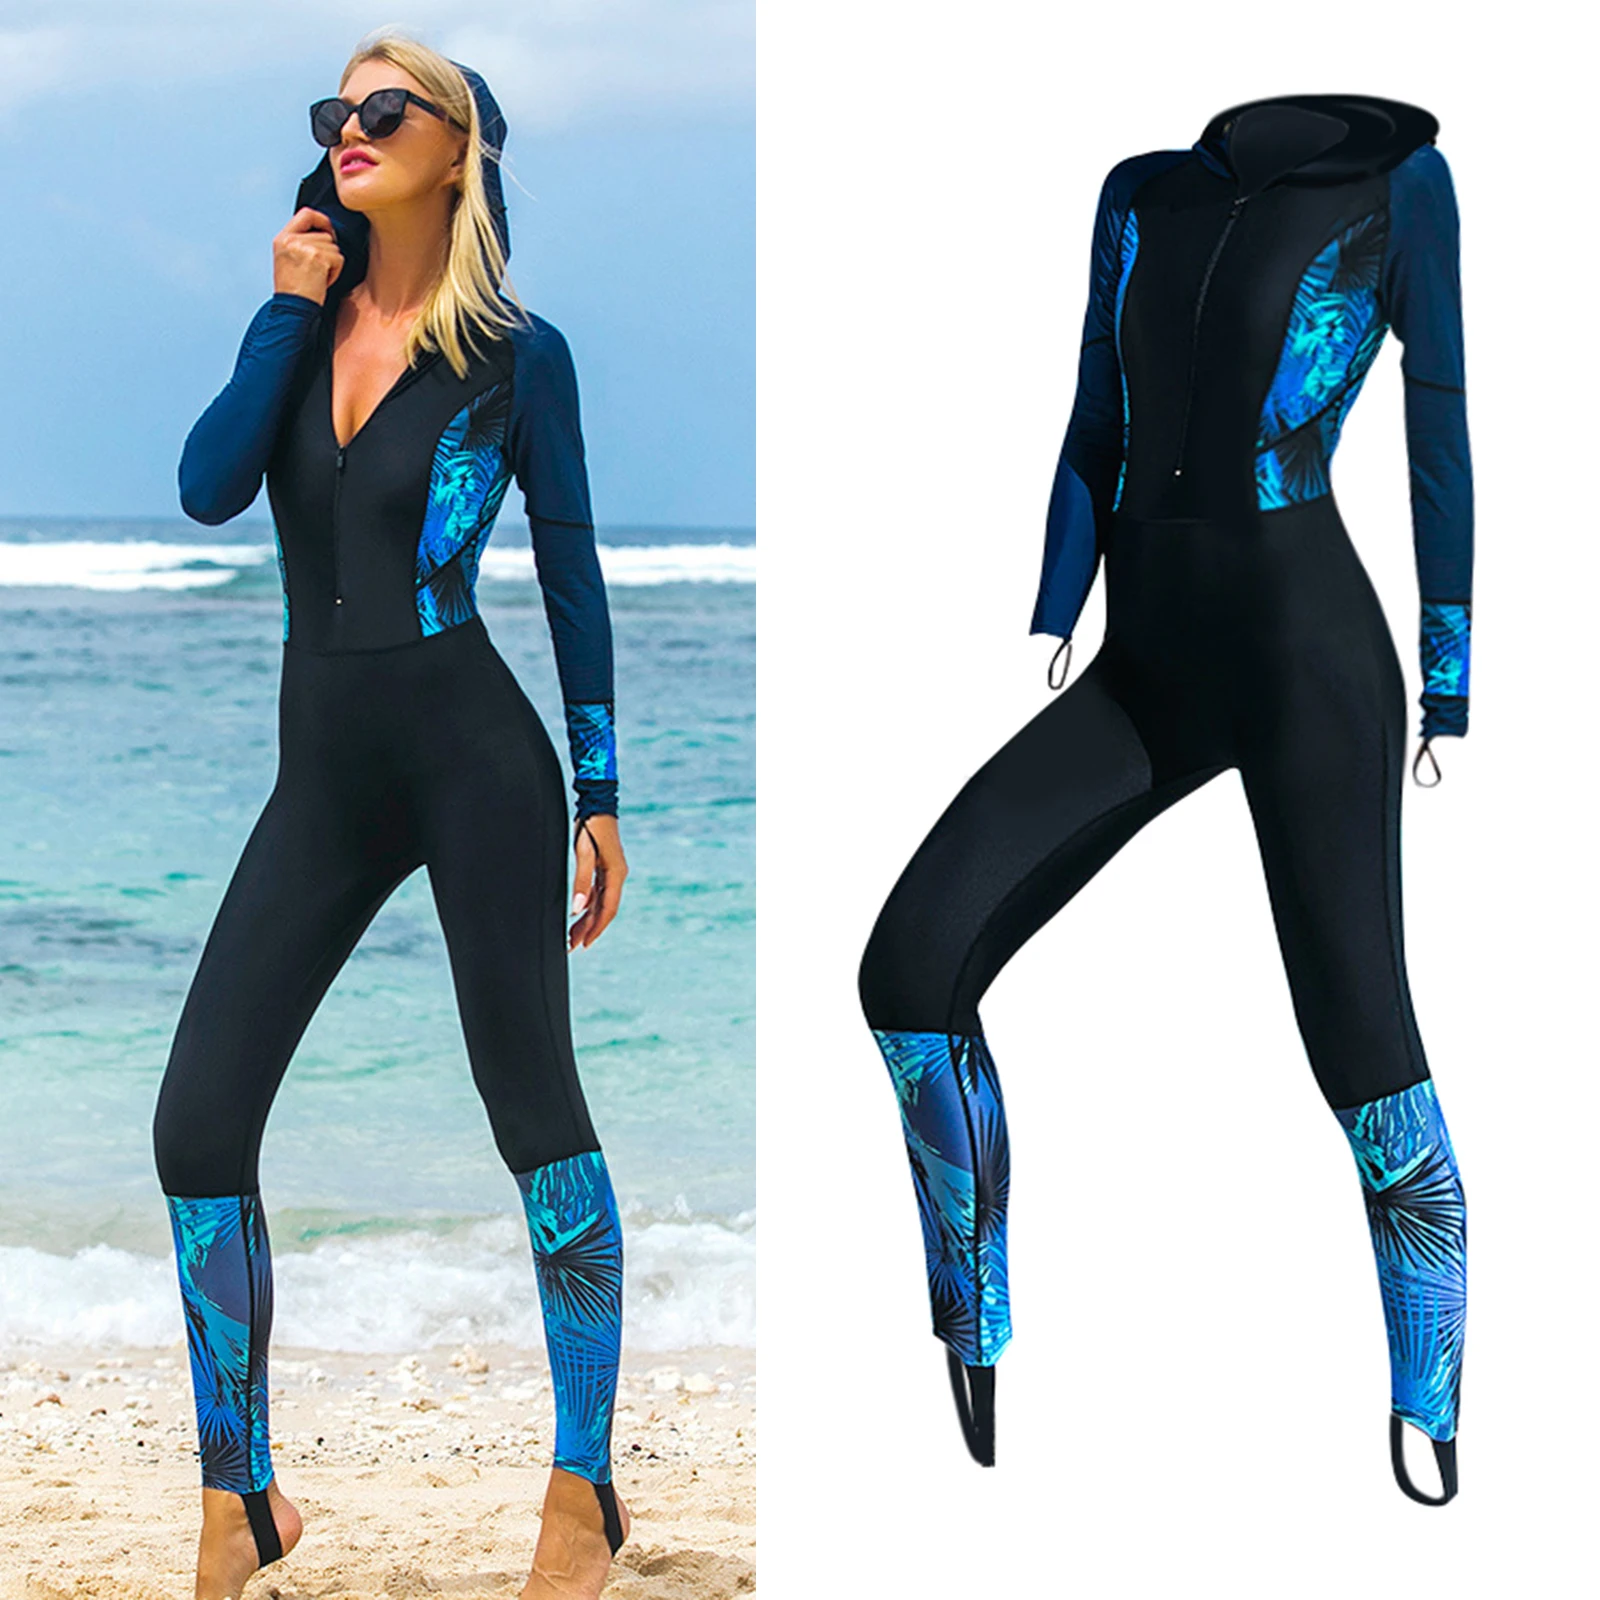 Women Full Body Diving Suit Lady Scuba Diving Wetsuit Swimming Surfing UV Protection Snorkeling Spearfishing Wet Suit Zipper